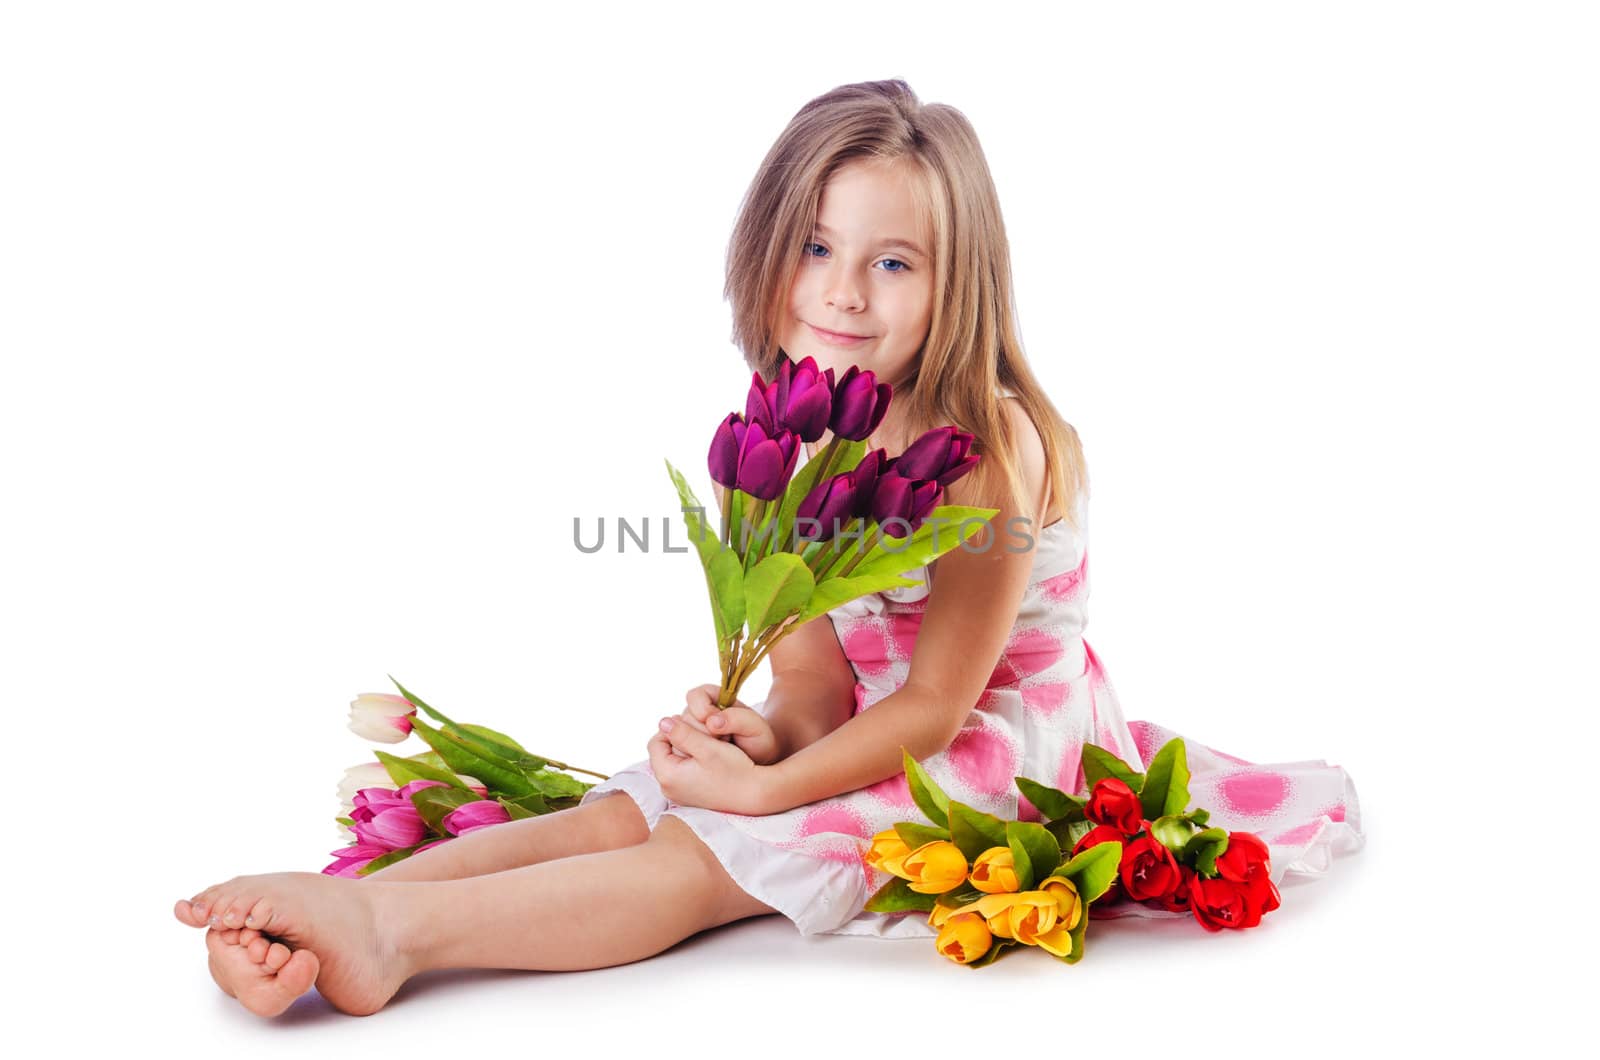 Cute little girl with flowers on white